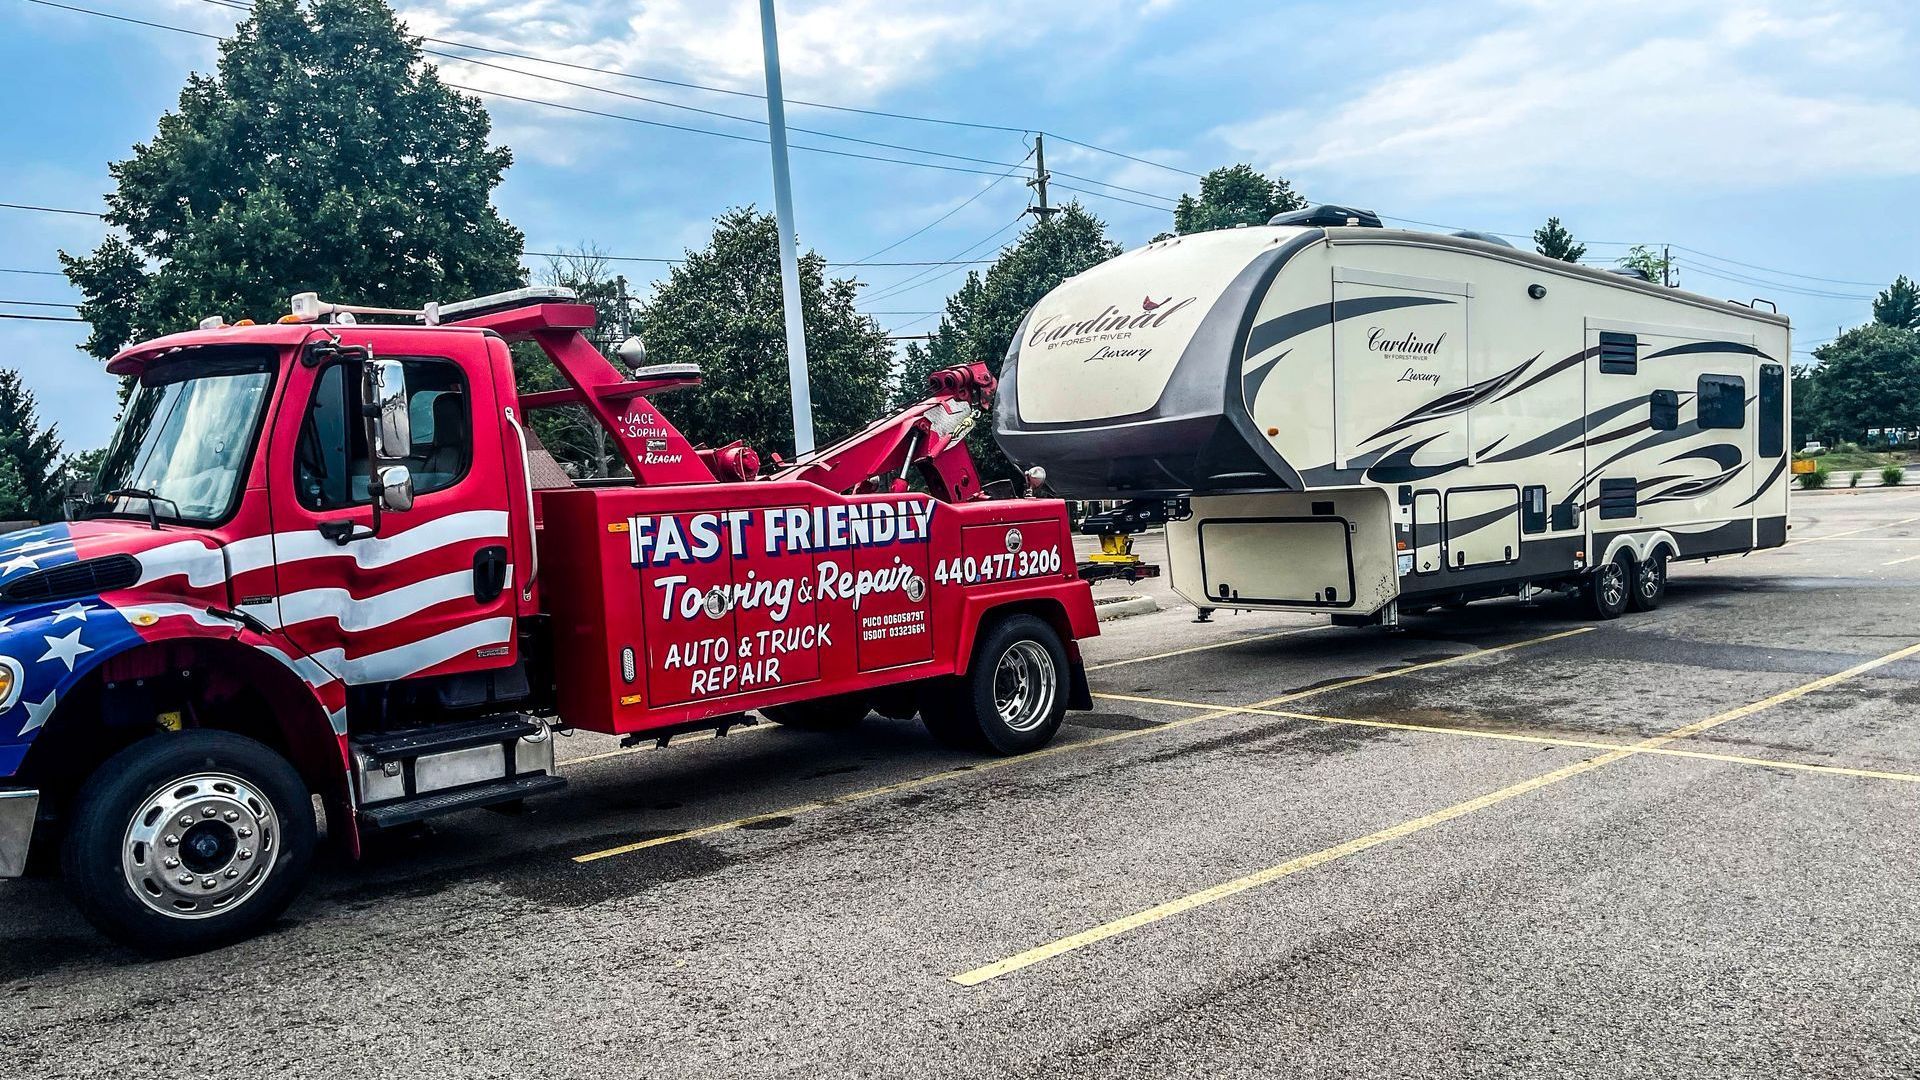 Medium towing at Fast Friendly Repair & Towing in Painesville, OH